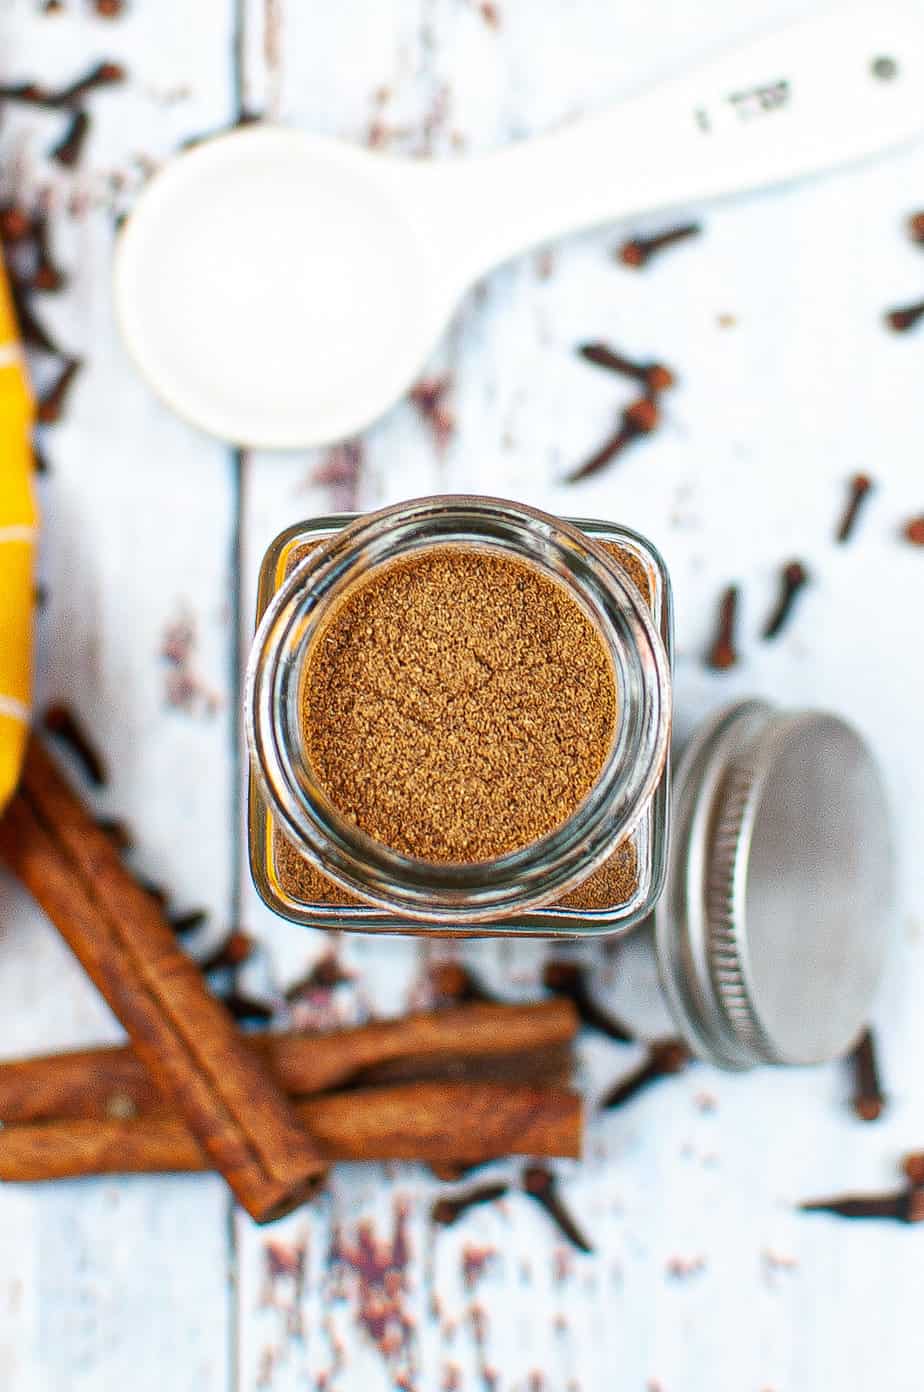 Open glass jar of pumpkin pie spice from overhead with spices, measuring spoons and sticks of cinnamon on the table nearby.